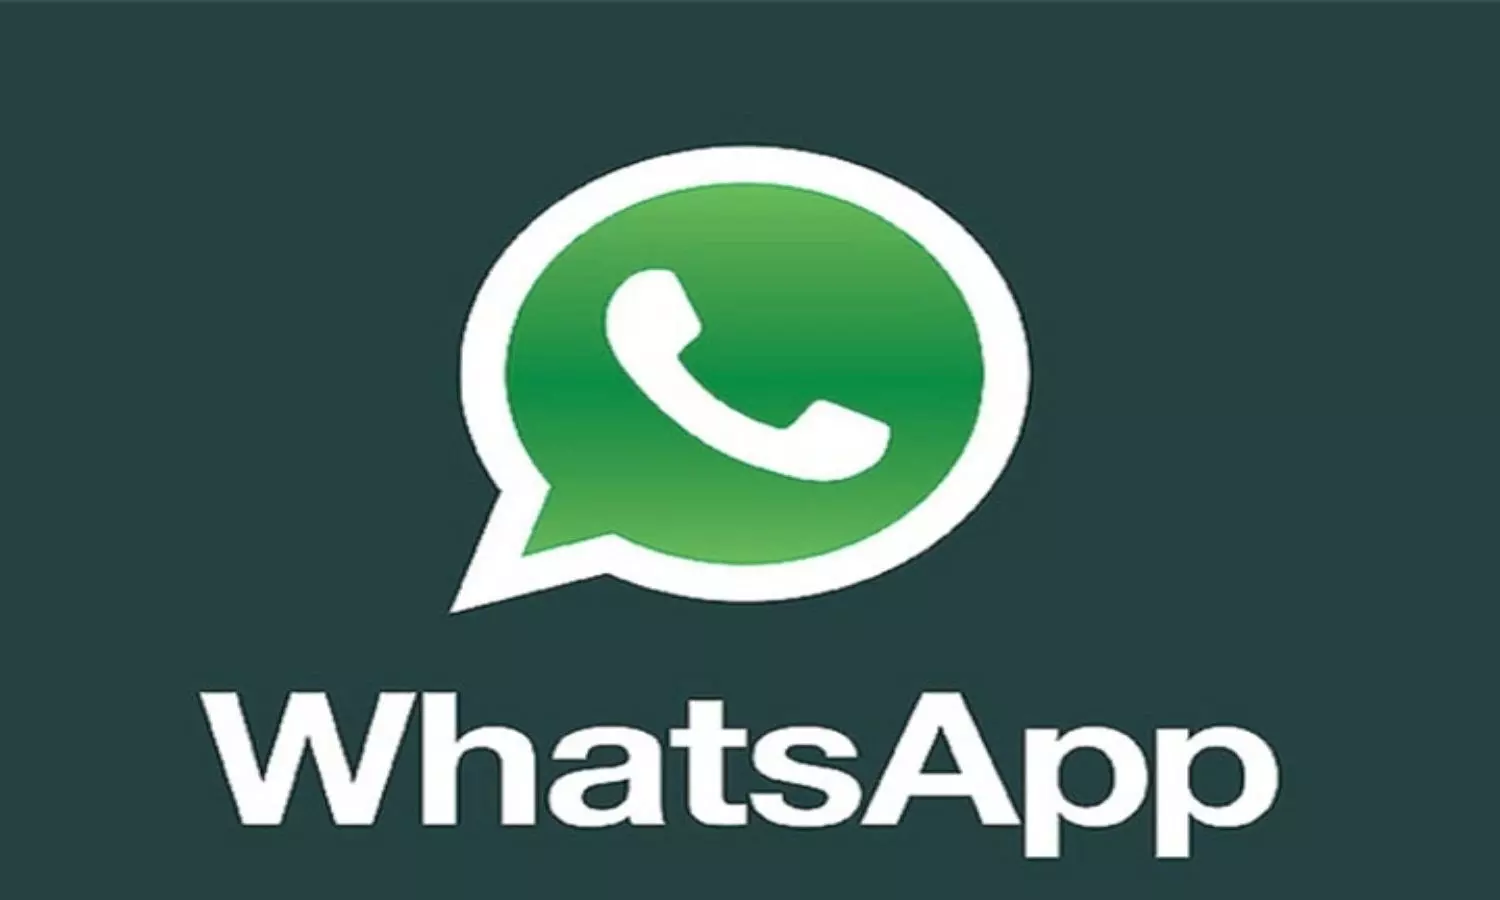 Whatsapp live location features